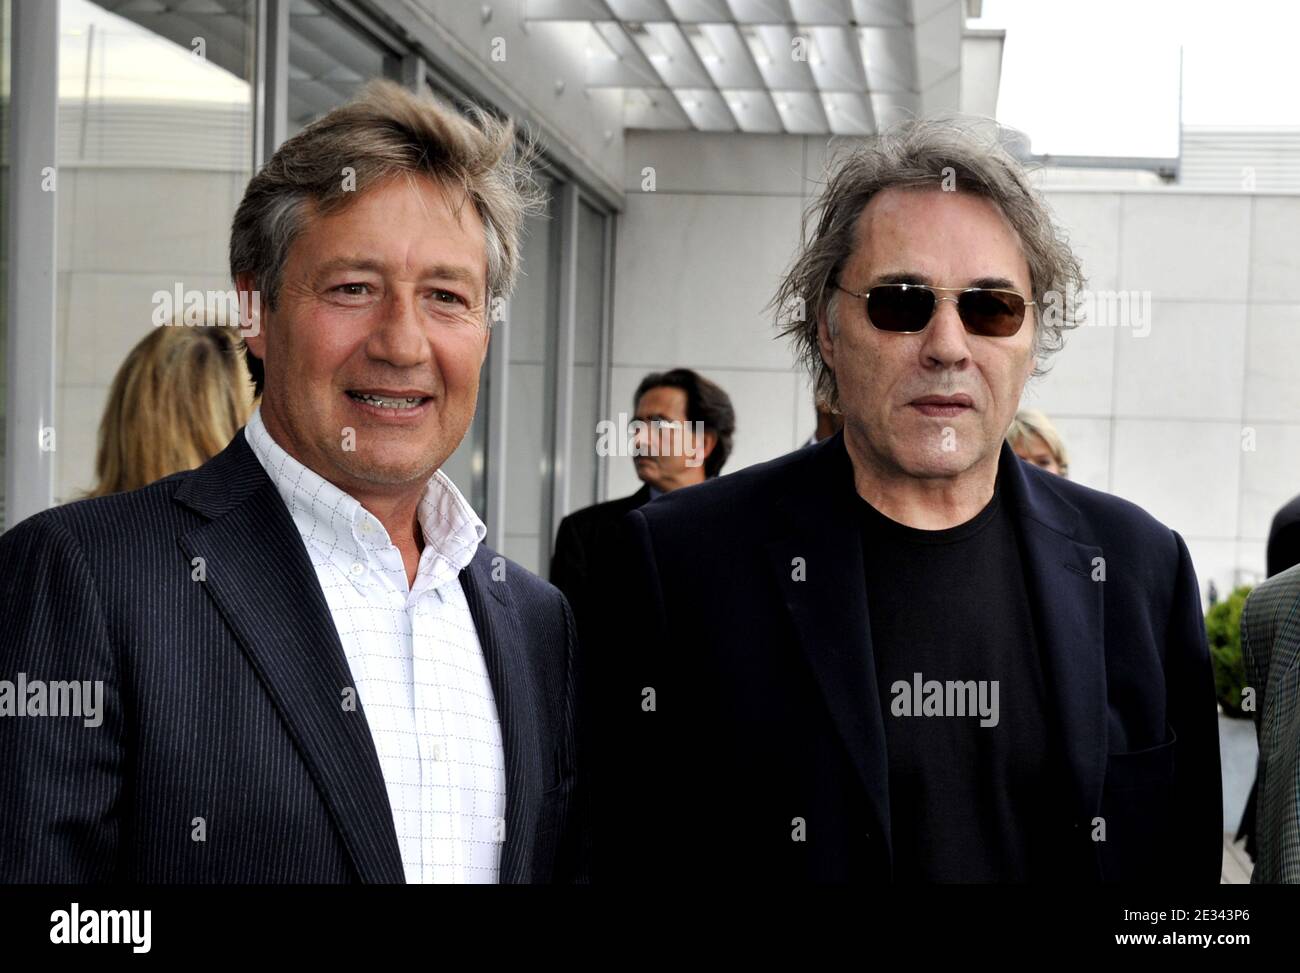 EXCLUSIVE. Patrick Sabatier (L) and Yves Simon attend a ceremony to award Laurent Boyer with the order of 'Chevalier dans l'Ordre National du Merite' by Alain-Dominique Perrin, at M6's TV channel studios, in Neuilly, France, on September 23, 2010. Photo by christophe Guibbaud/ABACAPRESS.COM Stock Photo